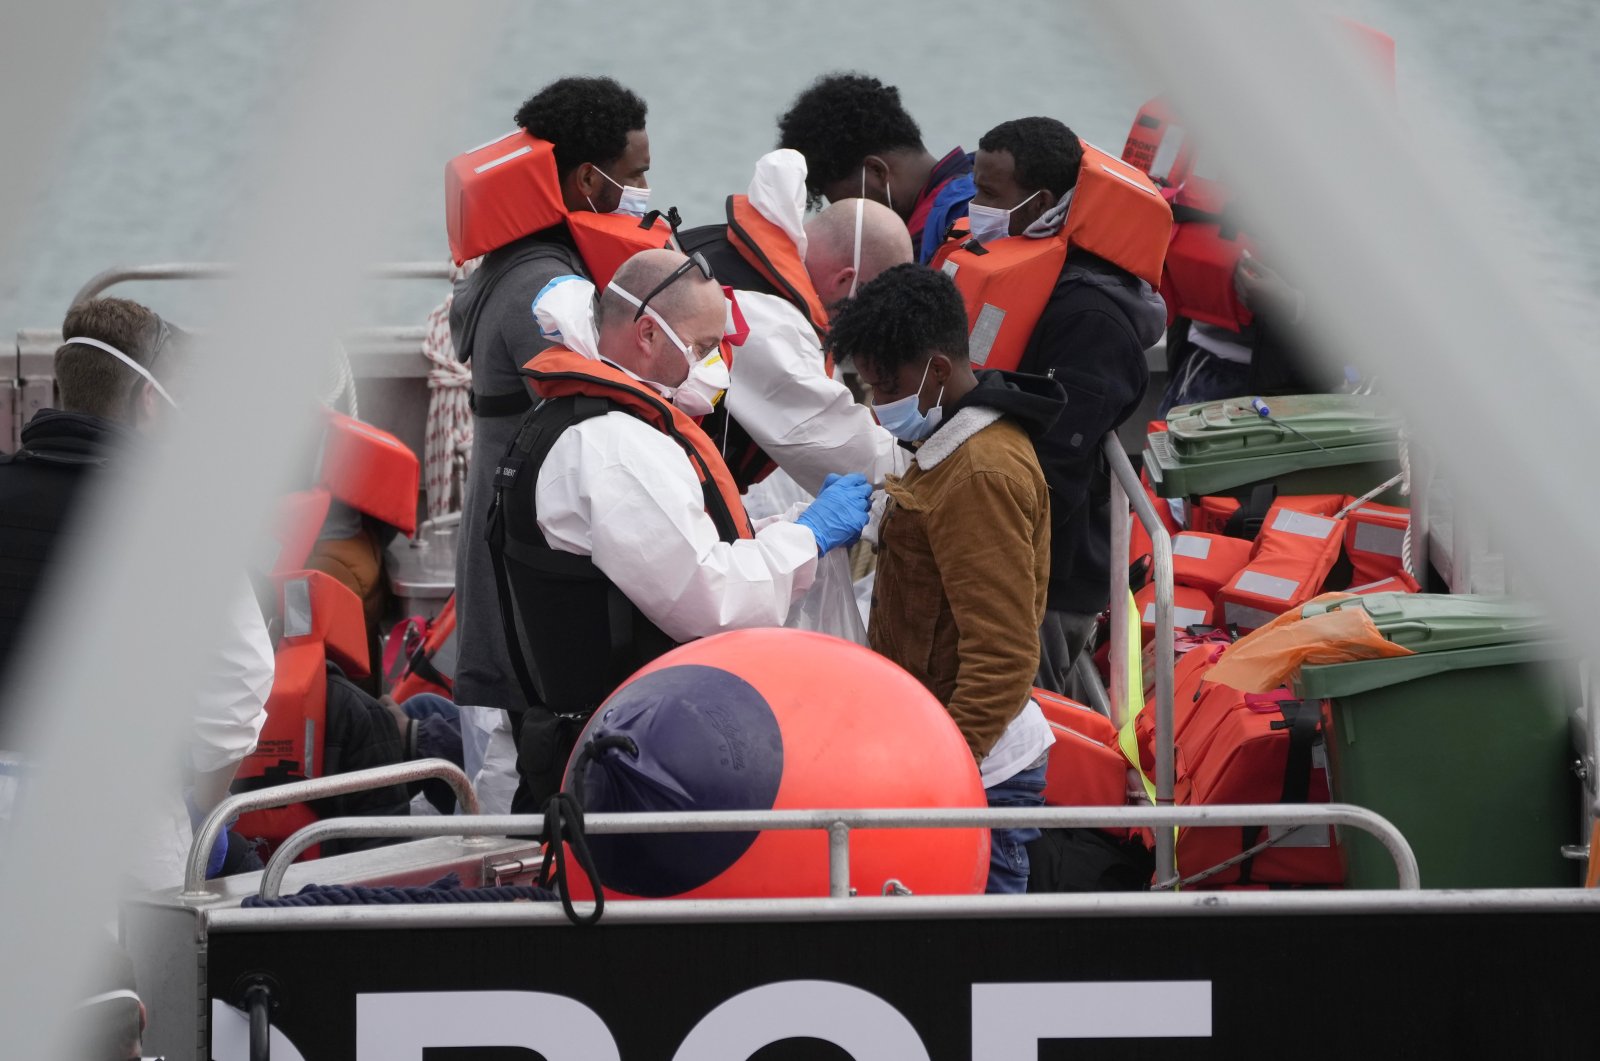 People thought to be migrants who made the crossing from France are disembarked after being picked up in the Channel by a British Border Force vessel in Dover, southeast England, Aug. 13, 2021. (Photo by Matt Dunham via AP)